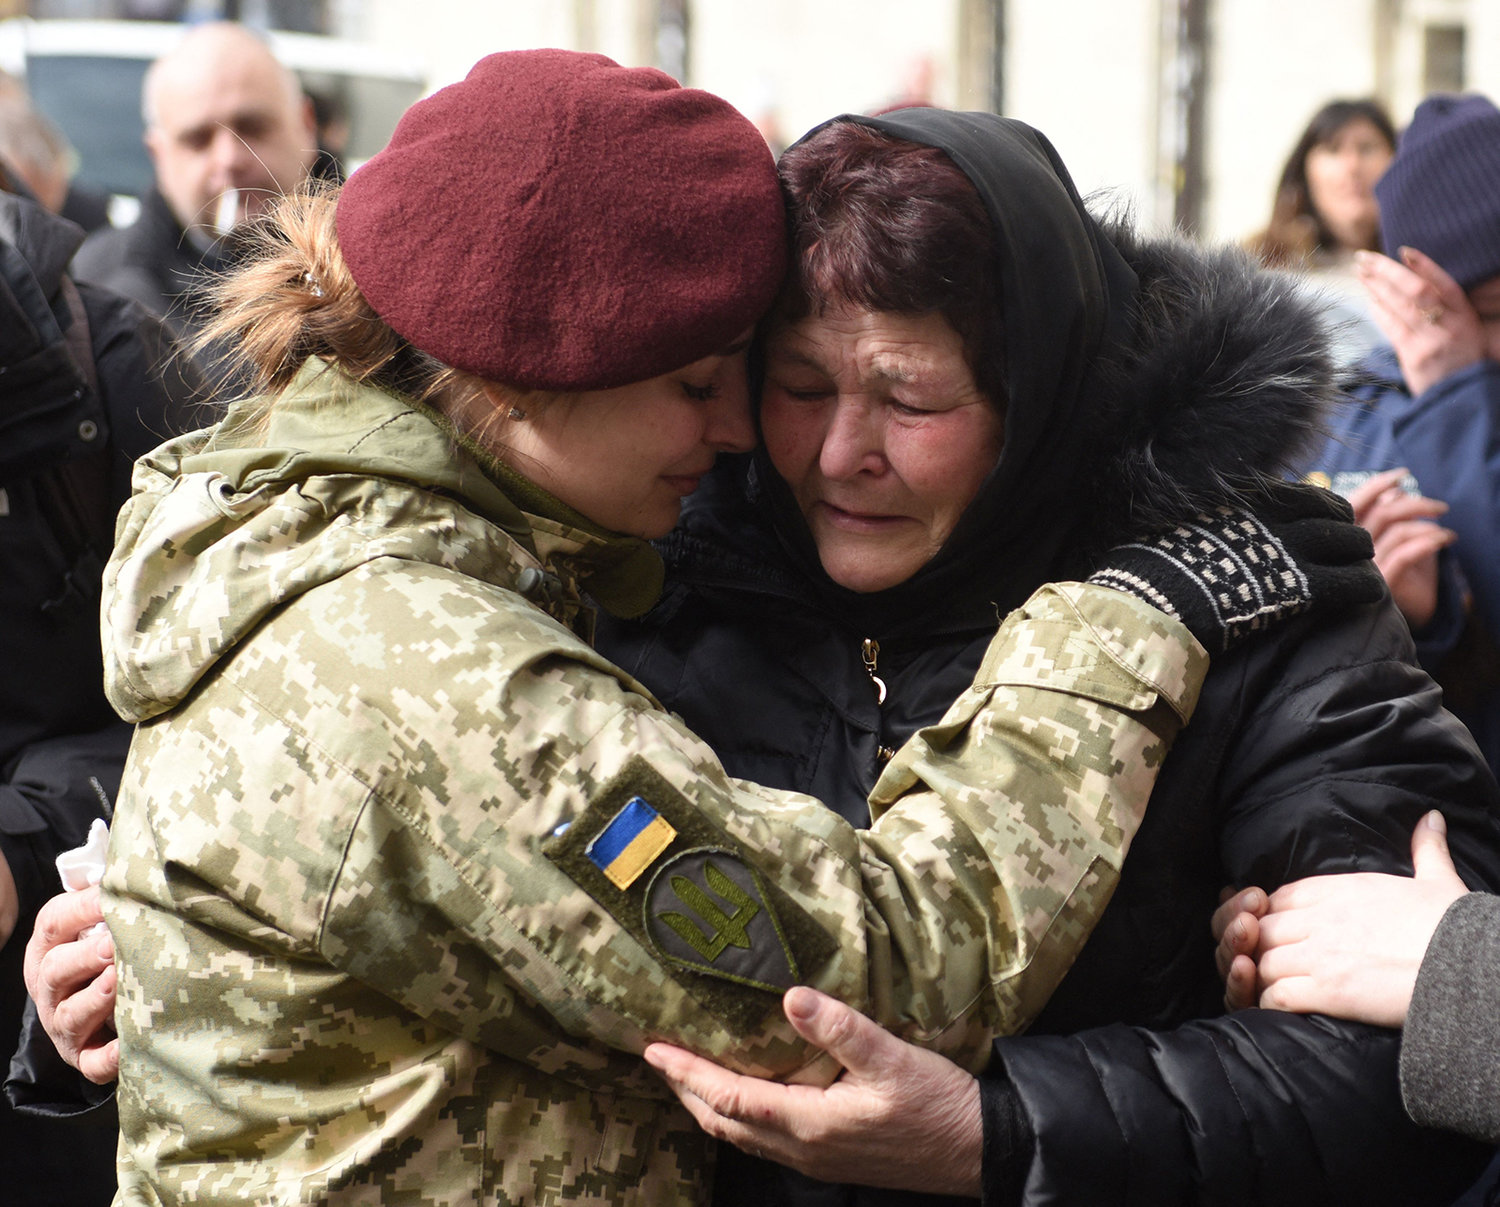 A servicewoman reacts during funerals of Dmytro Kotenko, Vasyl Vyshyvany and Kyrylo Moroz, Ukrainian servicemen killed during Russia's invasion of Ukraine, in the western Ukrainian city of Lviv on March 9, 2022. (Yuriy Dyachyshyn/AFP via Getty Images/TNS)